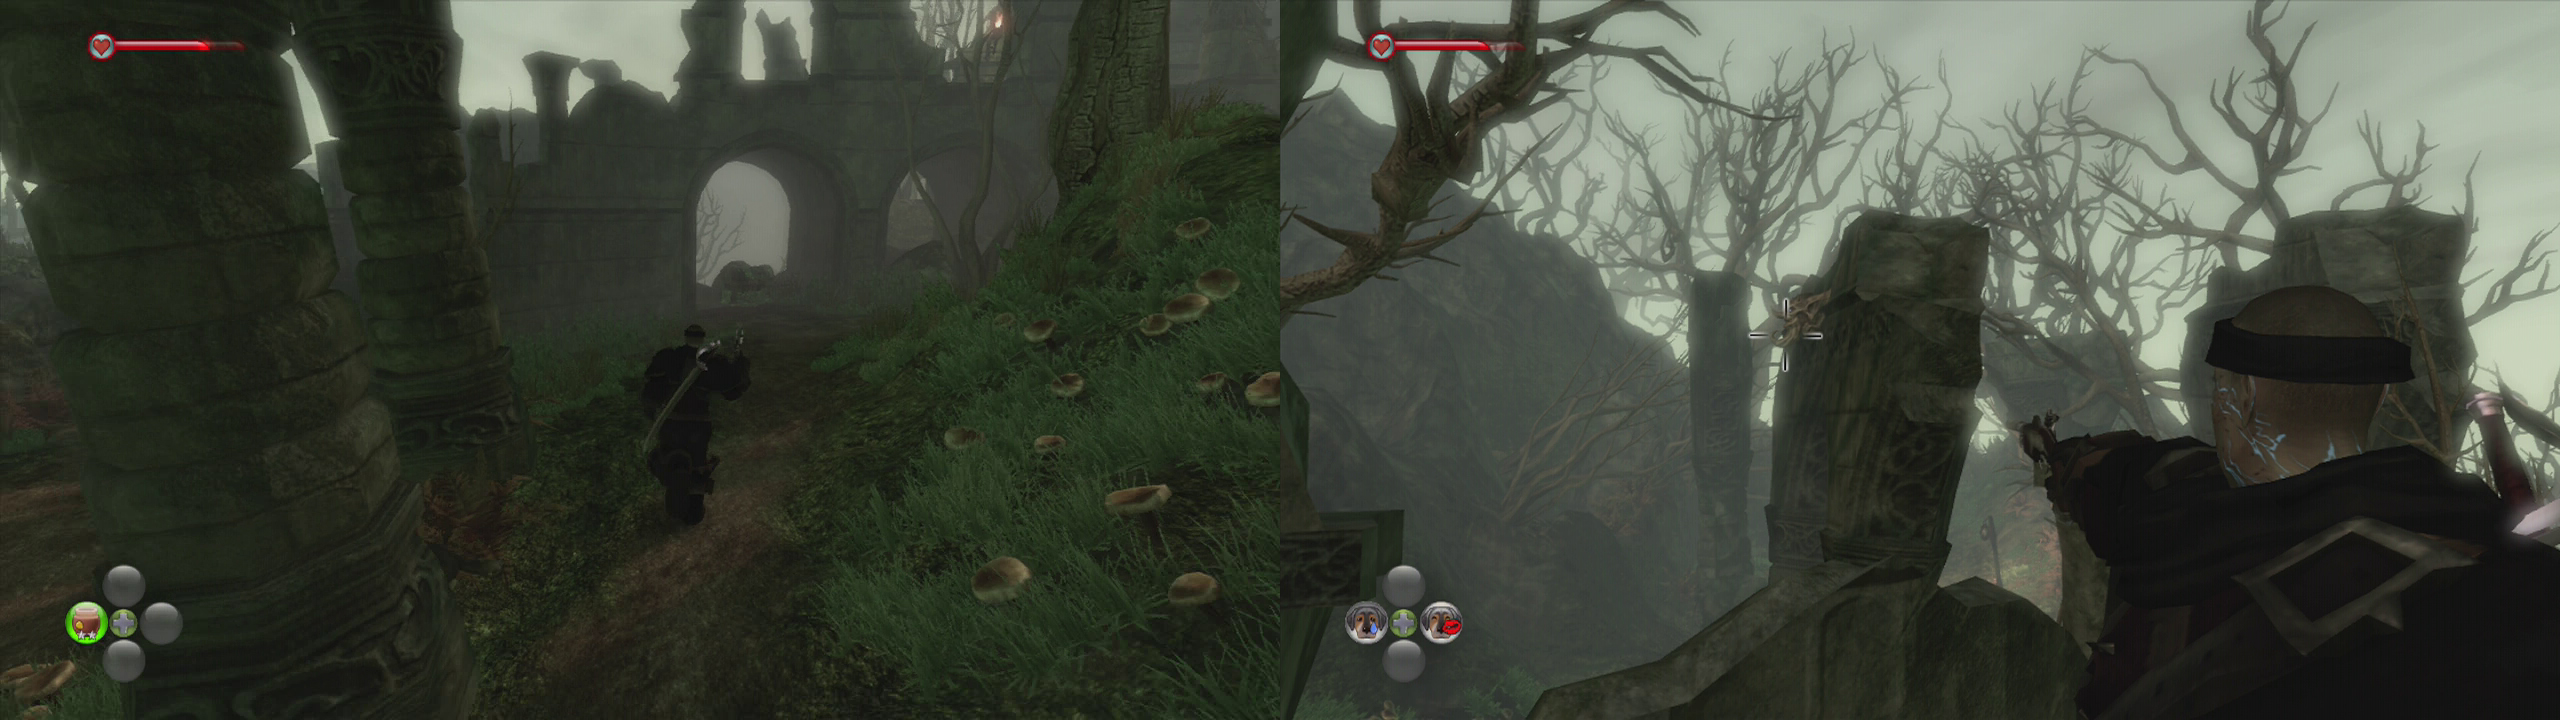 Grab the chest from below the archway (left) and then climbb the stairs and look back to spot a gargoyle (right).